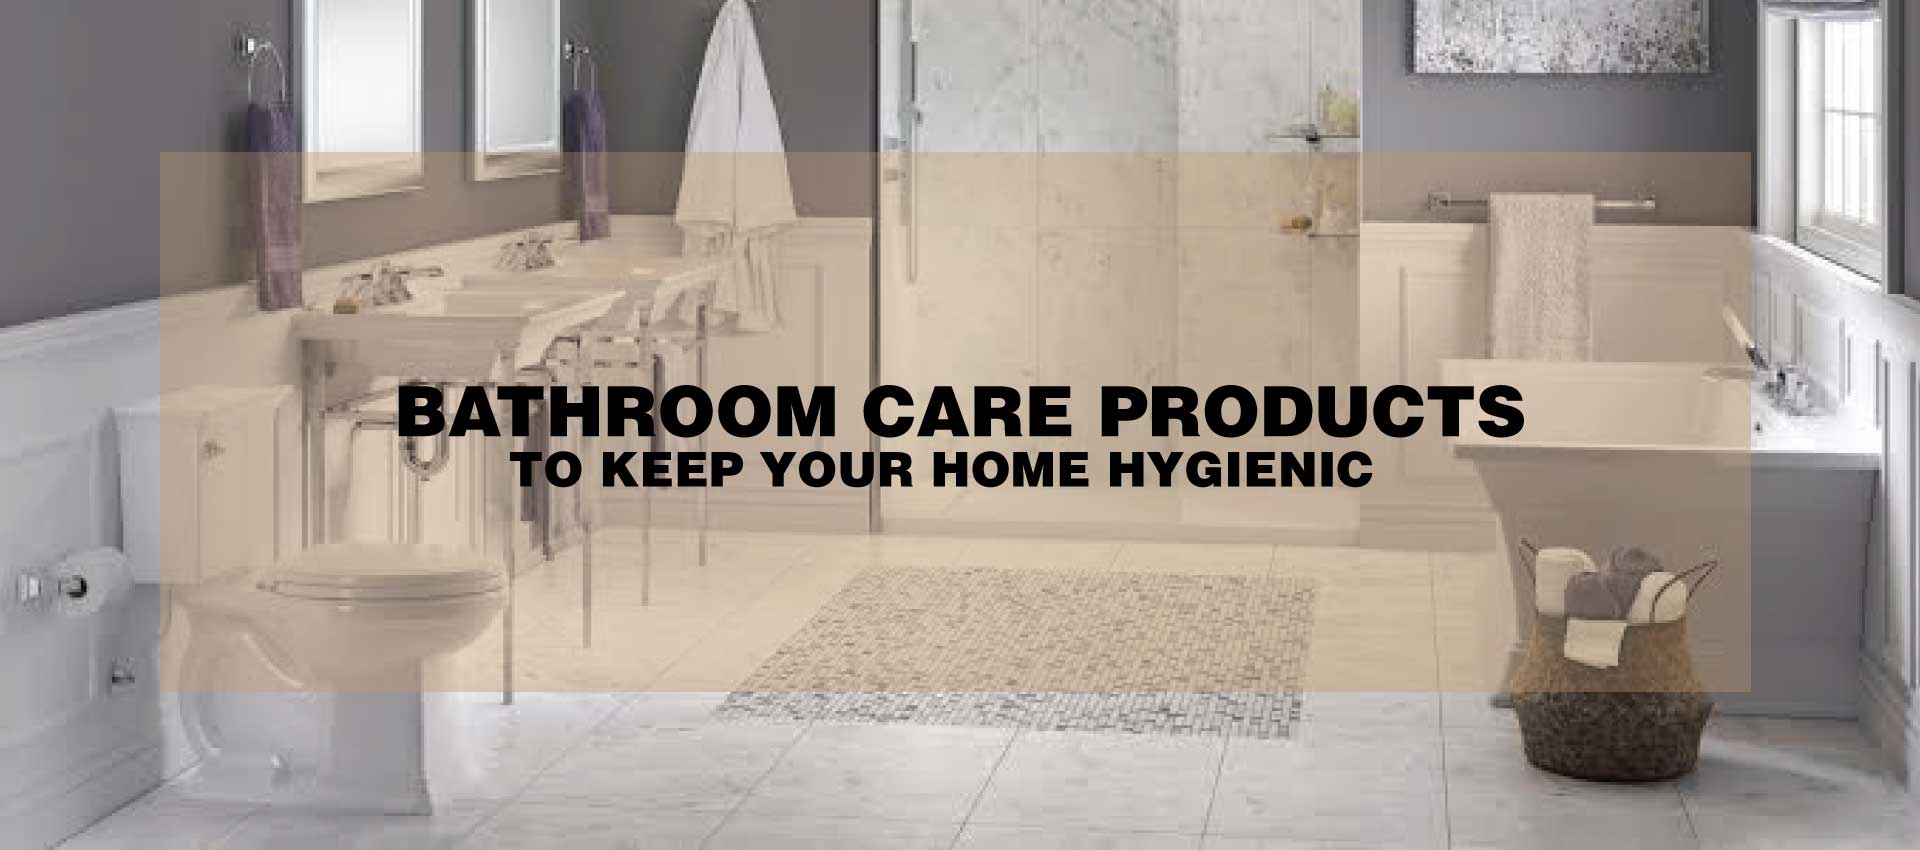 Top 10 Bathroom Care Products In Pakistan To Keep Your Home Hygienic